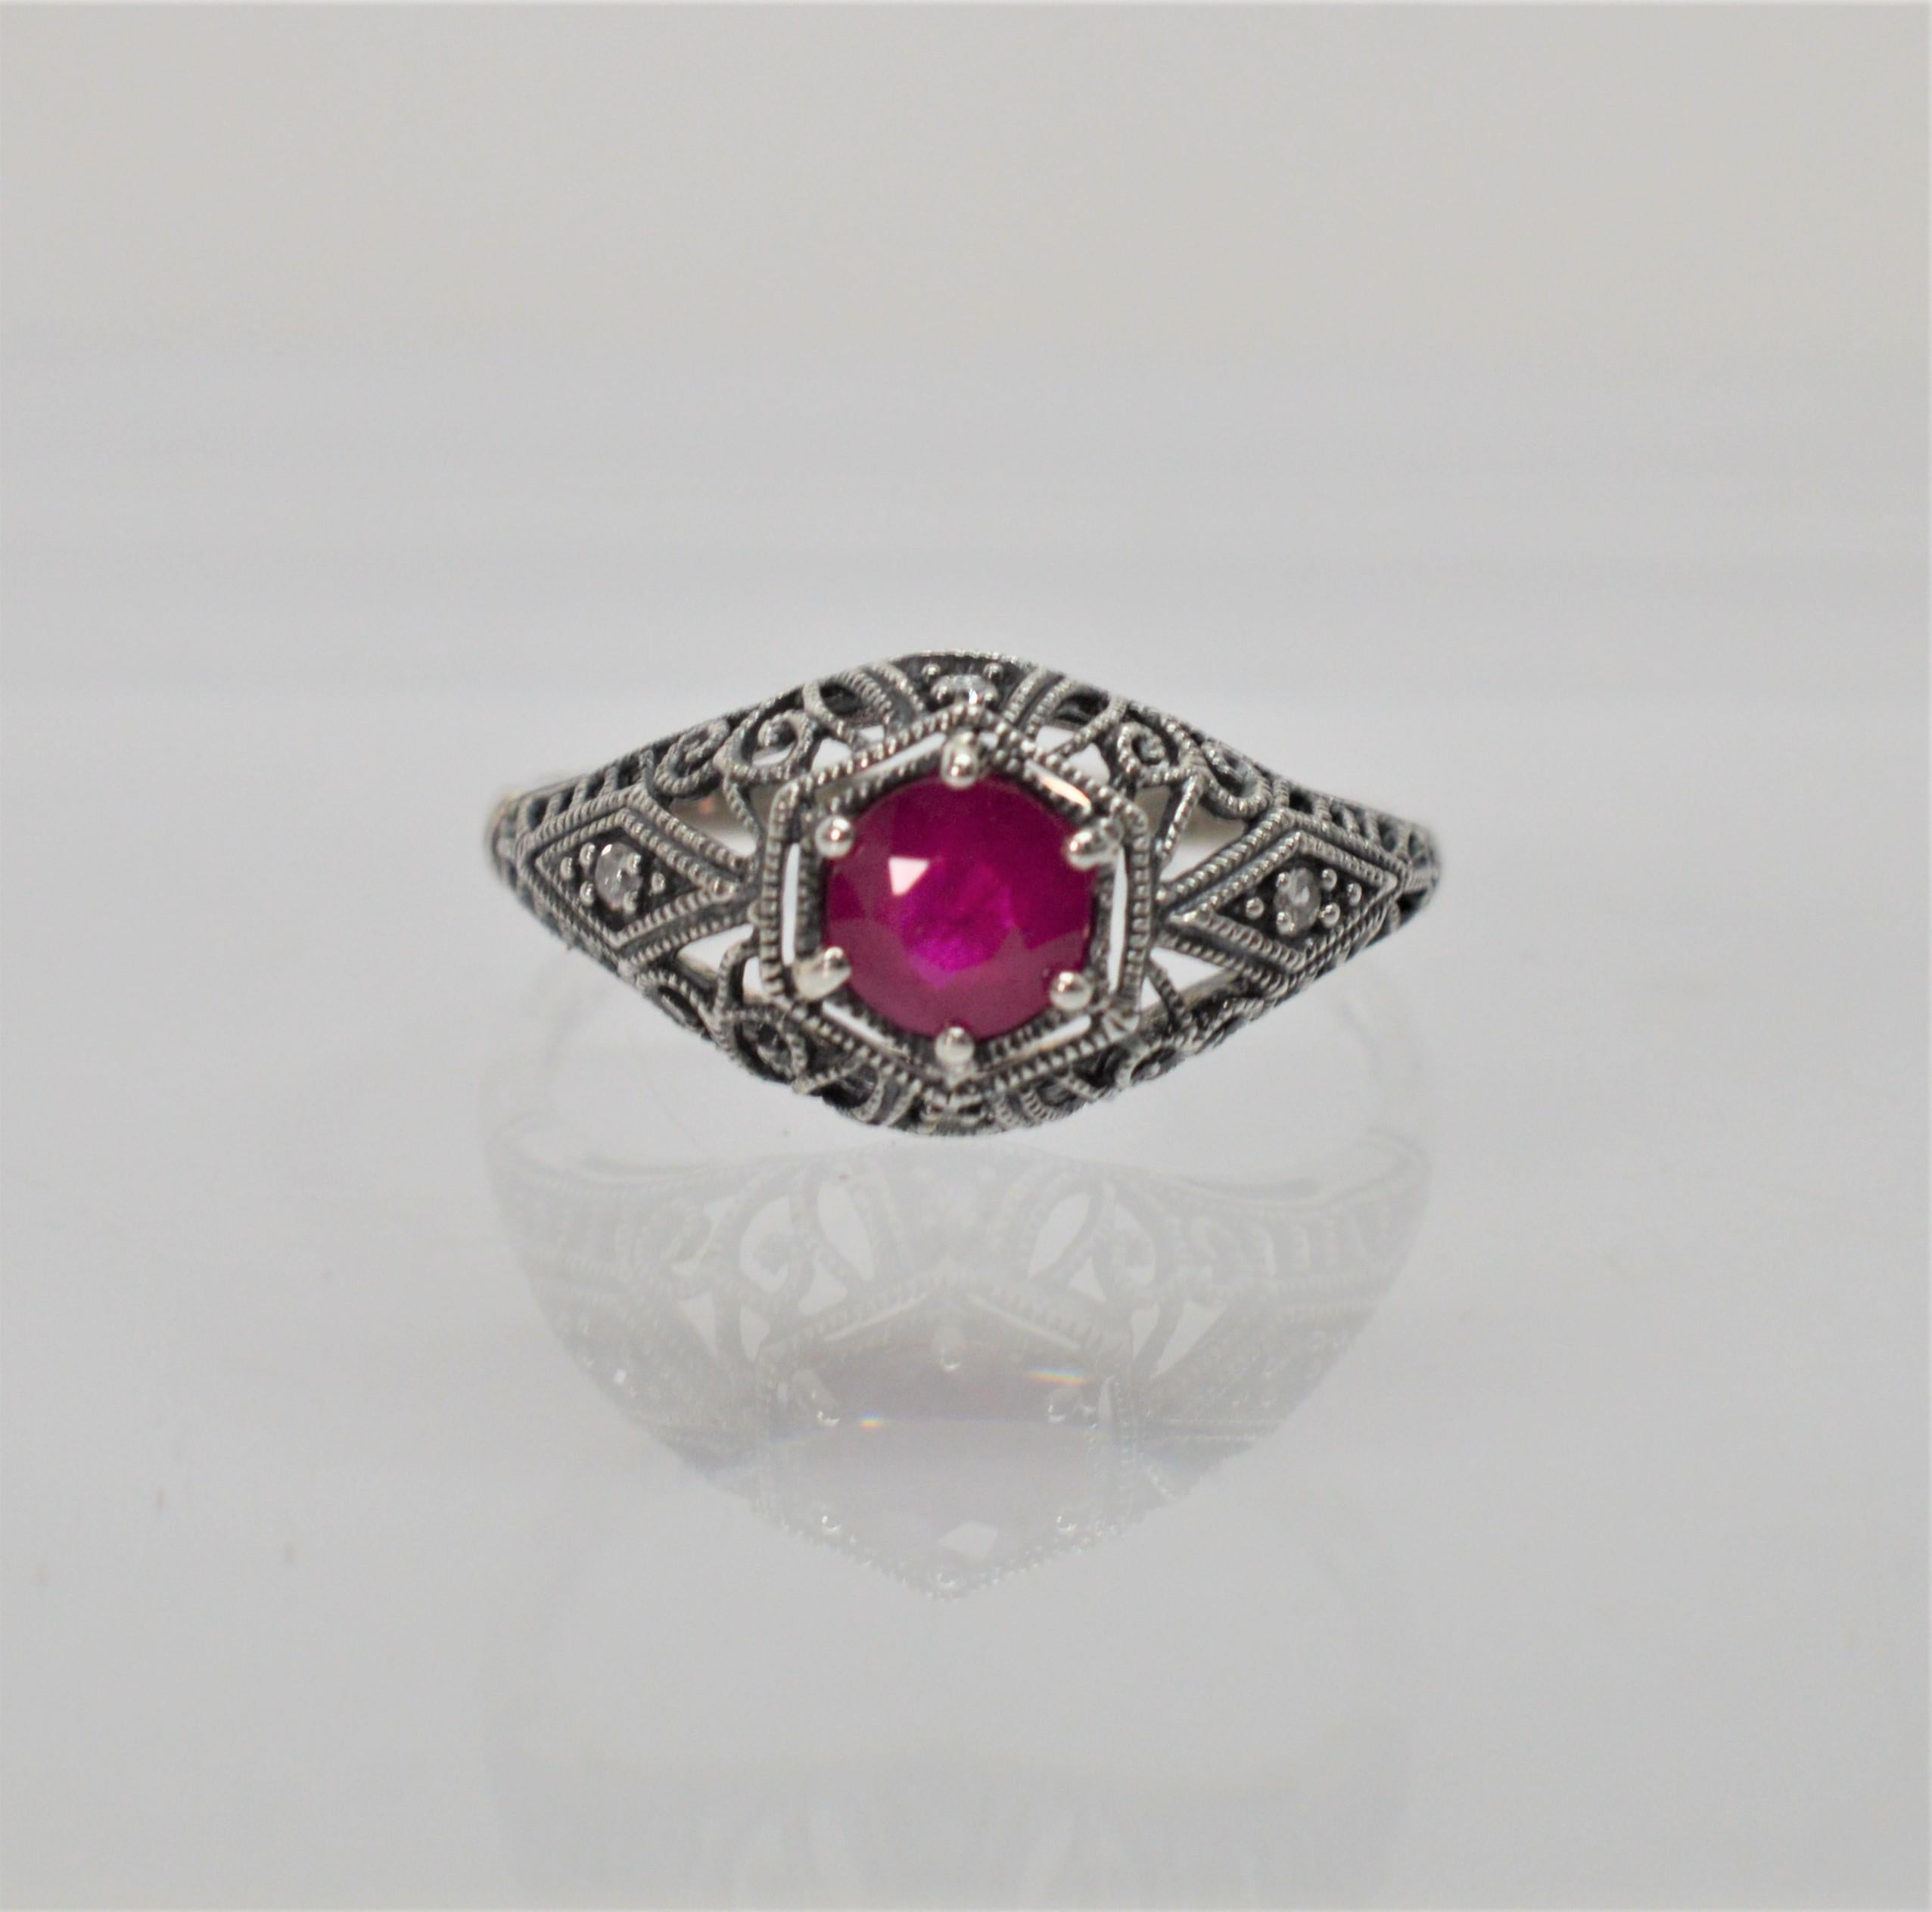 Vintage inspired design in sterling silver filigree with genuine gemstones. Enjoy this timeless design with exquisite detail reminiscent of the Art Deco Period. This sweet vintage style ring has a 2.5 carat round faceted Ruby with two diamond